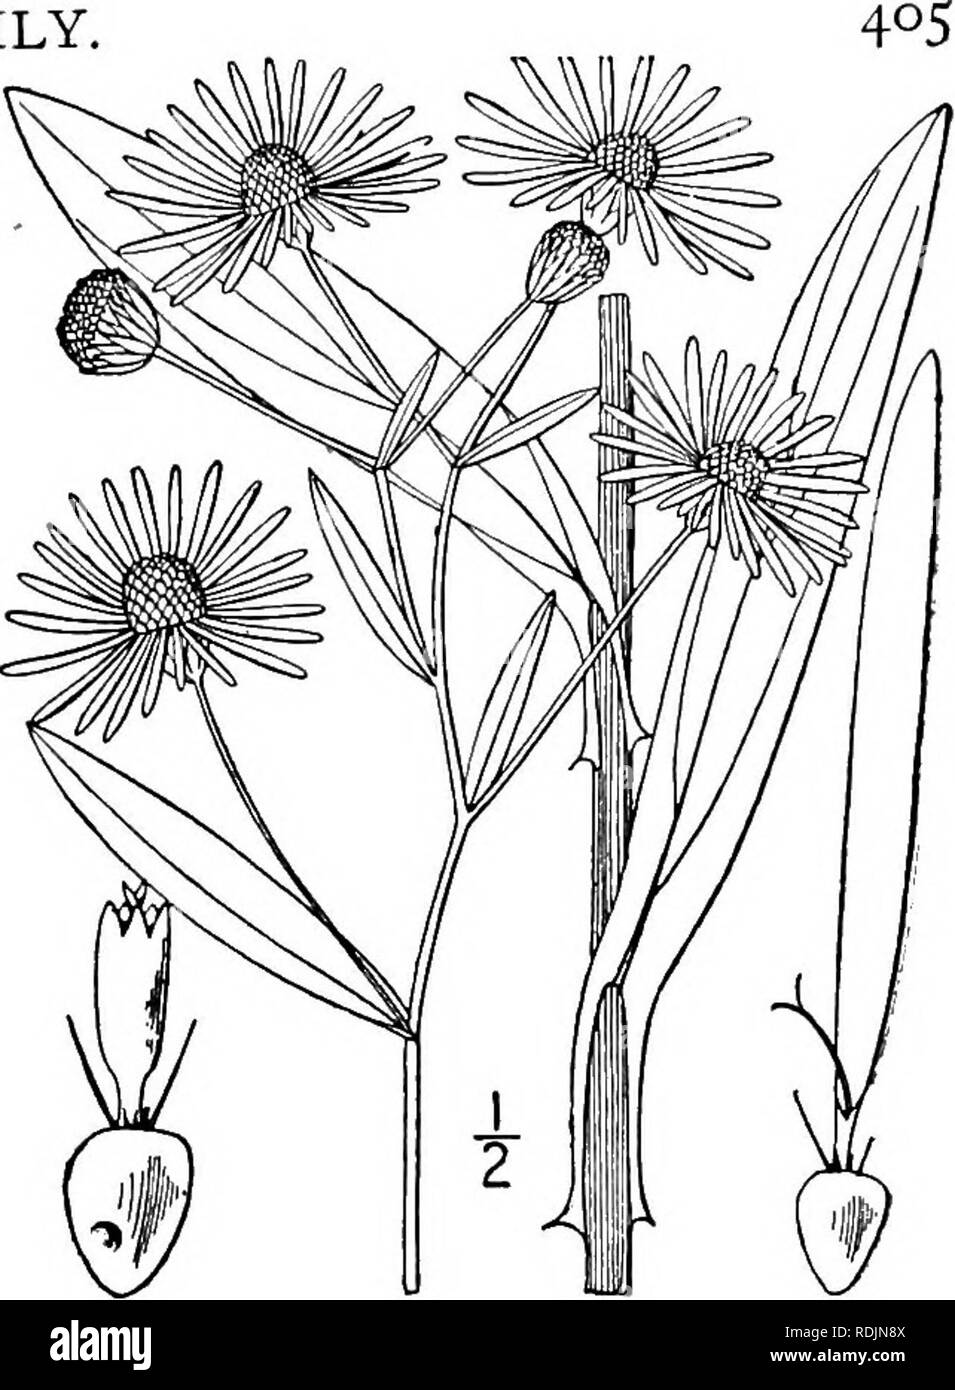 . An illustrated flora of the northern United States, Canada and the British possessions, from Newfoundland to the parallel of the southern boundary of Virginia, and from the Atlantic Ocean westward to the 102d meridian. Botany; Botany. Genus 29. THISTLE FAMILY, 4. Boltonia decurrens (T. &amp; G.) Wood. Clasping-leaved Boltonia. Fig. 4278. Bol'.onia glastifolia var. (1) decurrens T. &amp; G. Fl. N. A. 2: 188. 1841. Boltonia decurrens Wood, Bot. &amp; Flor. 166. 1870. Boltonia asteroides var. decurrens Engelm.; A. Gray, Syn. Fl. 1: Part 2, 166. 1884. Stout, 3°-6° high, branched above. Leaves ob Stock Photo